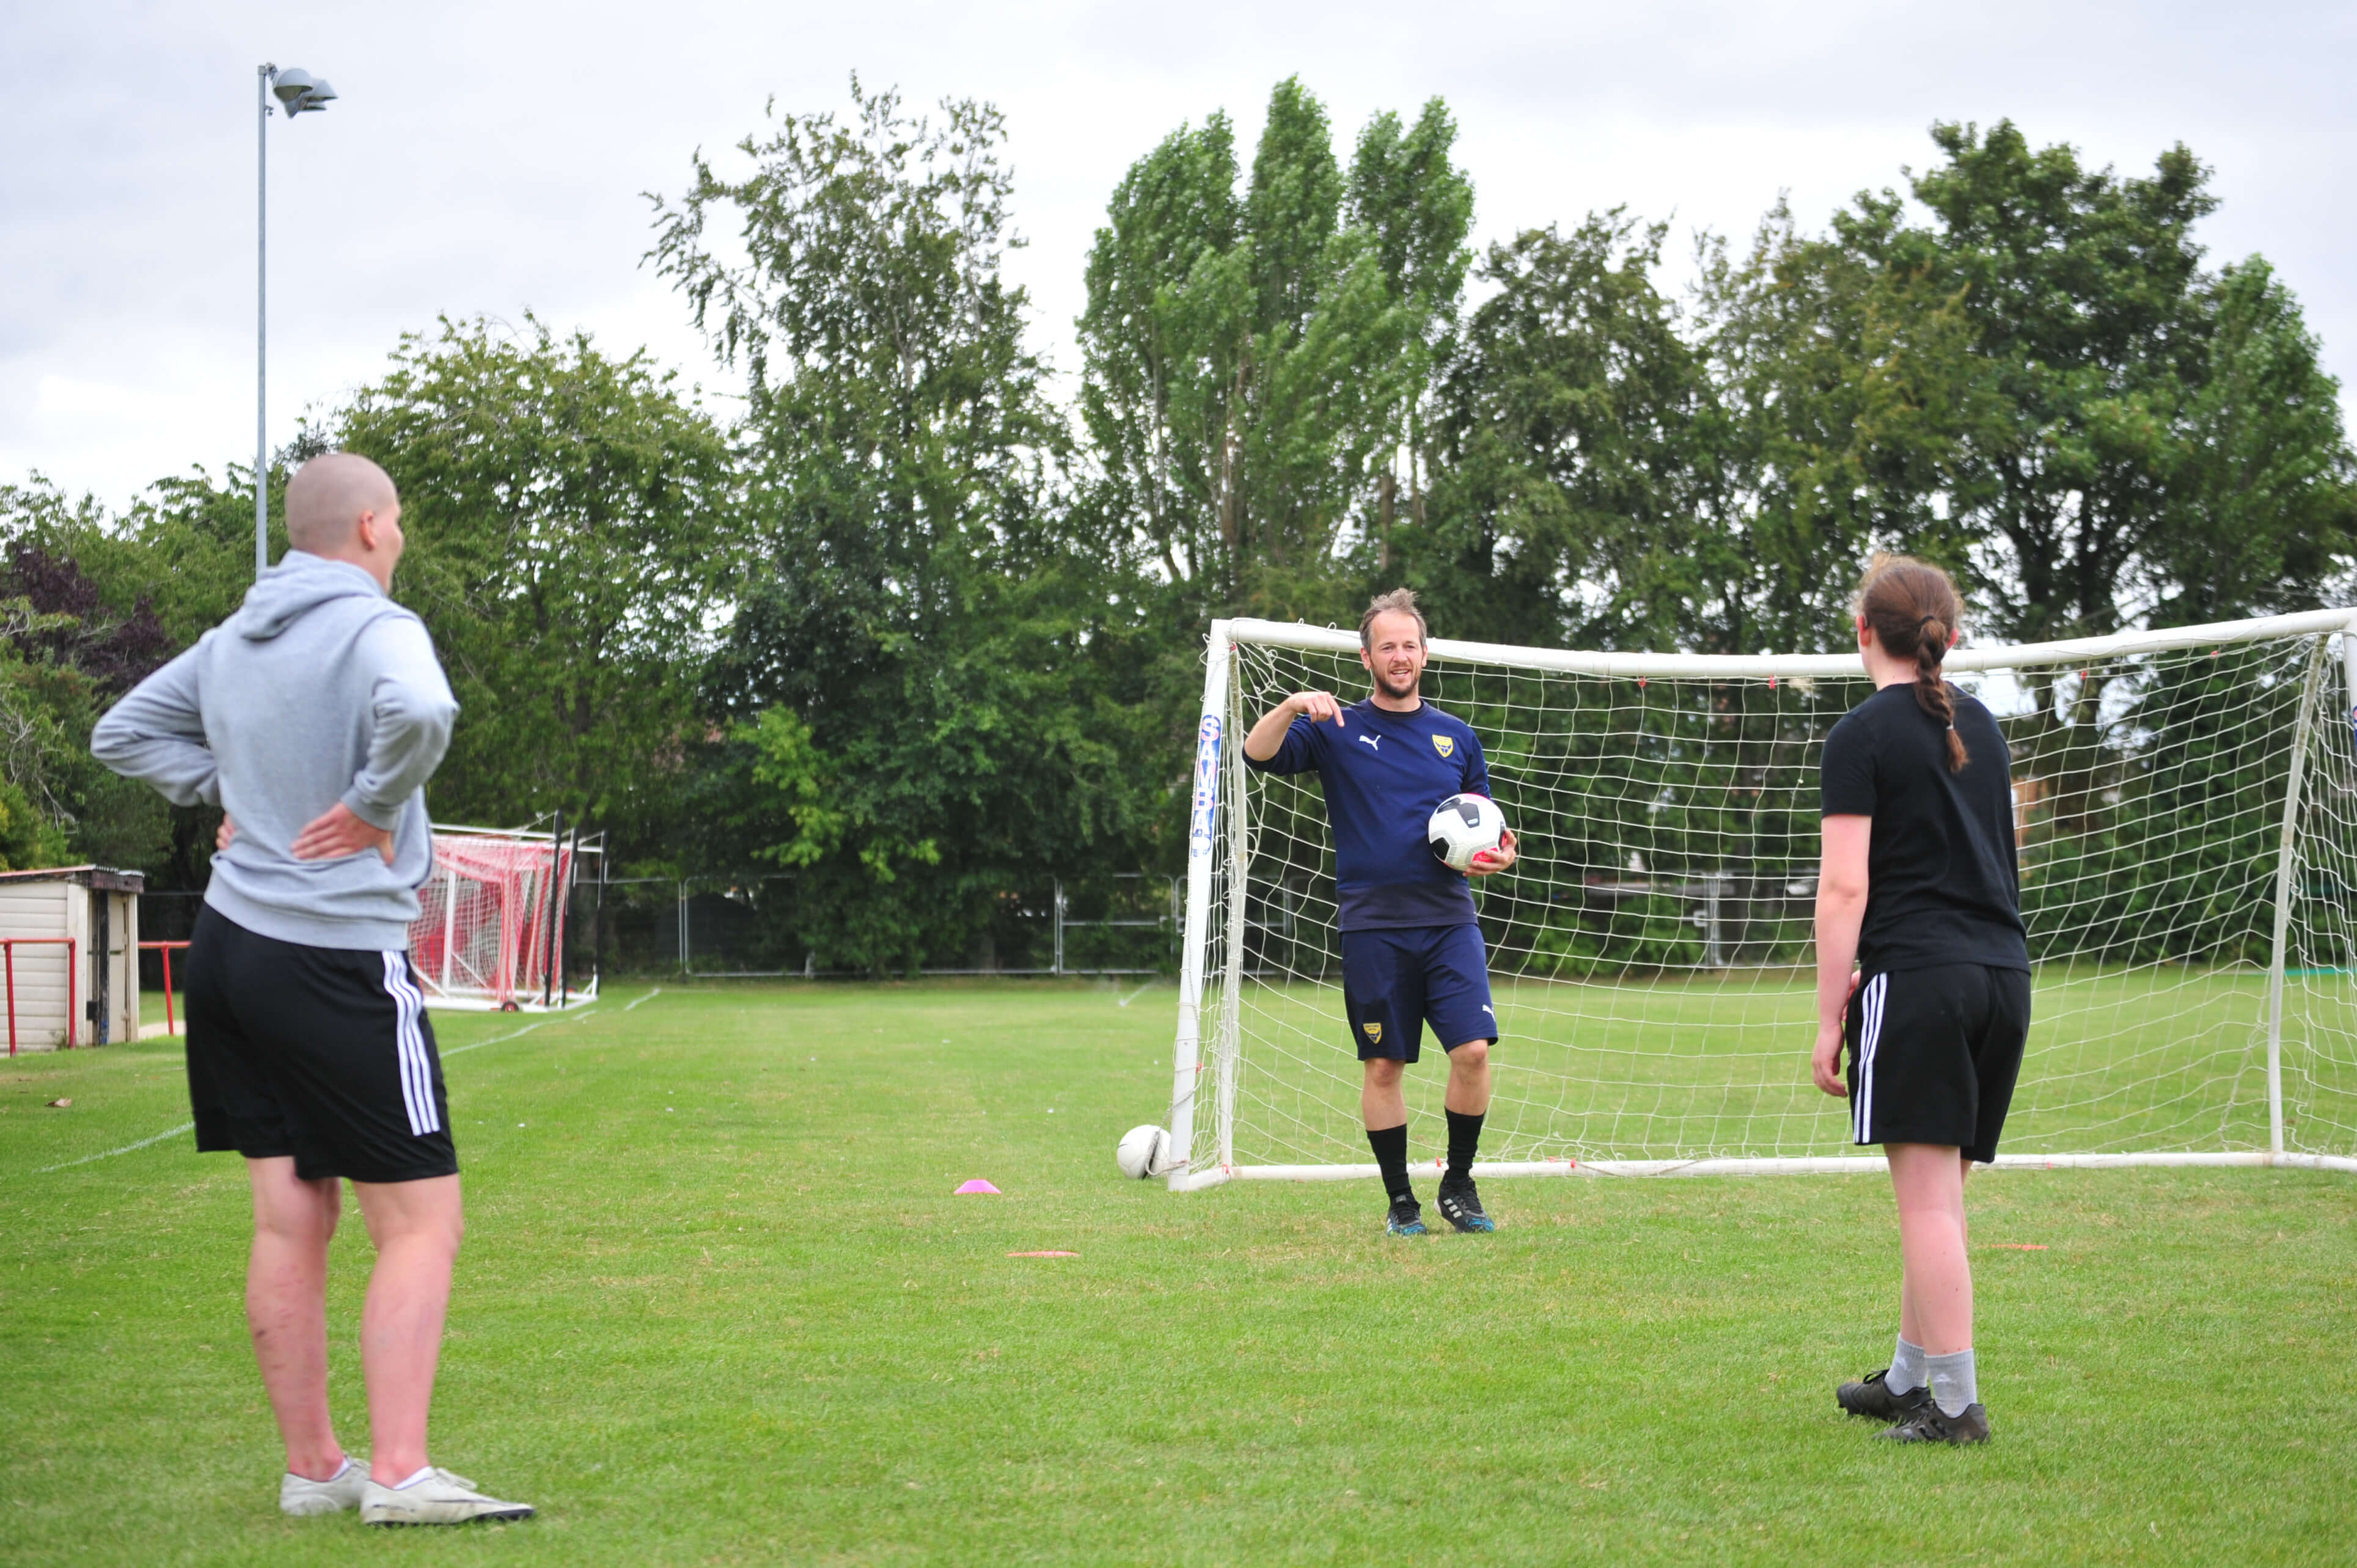 OXFORD UNITED IN THE COMMUNITY WELLBEING PARTICIPANTS TO EXPERIENCE THE THRILL OF LIVE FOOTBALL